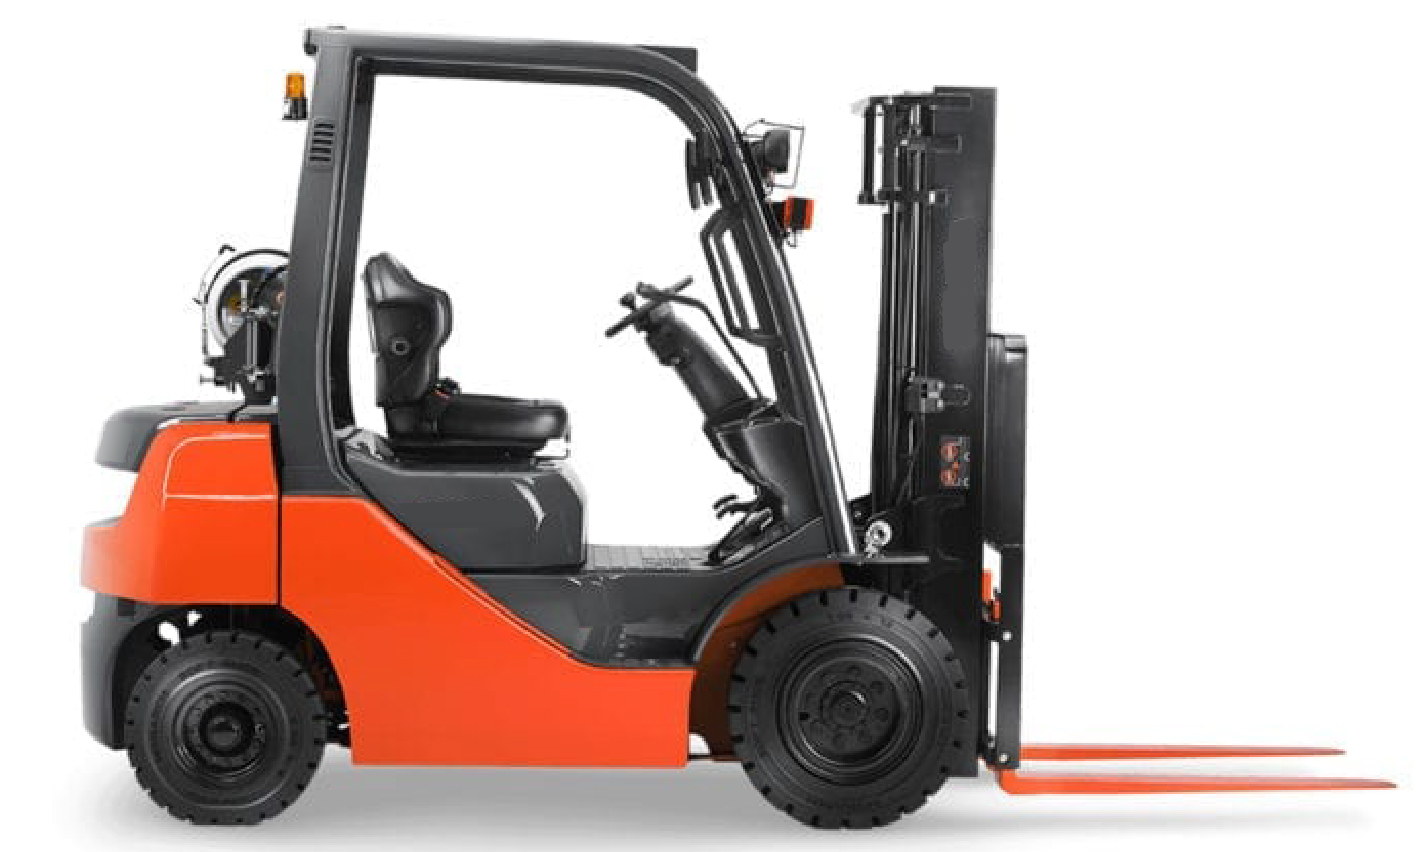 A forklift truck on a white background.